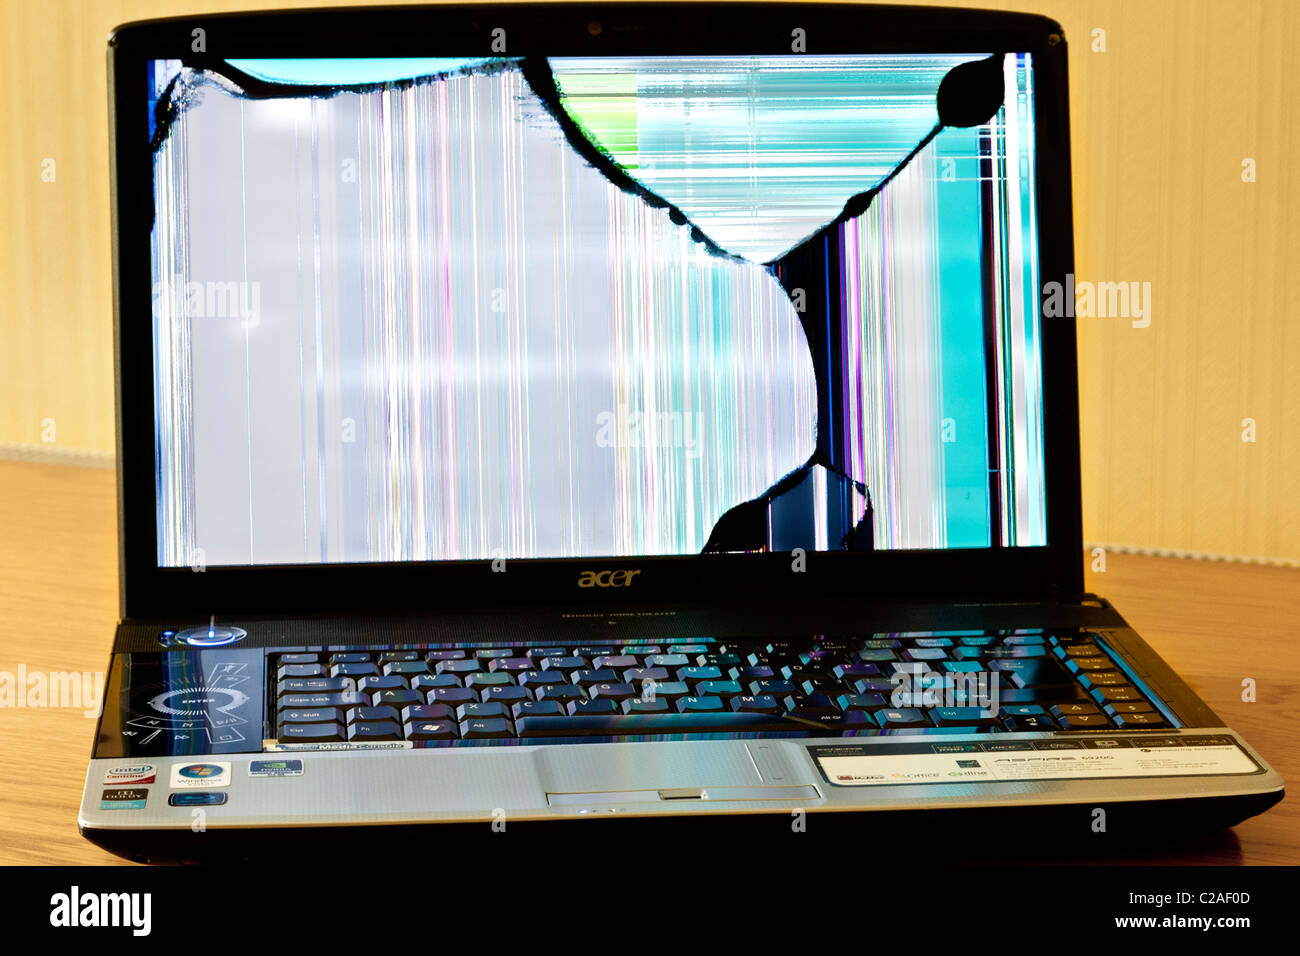 dropped laptop causing damage to casing and breaking lcd screen Stock Photo